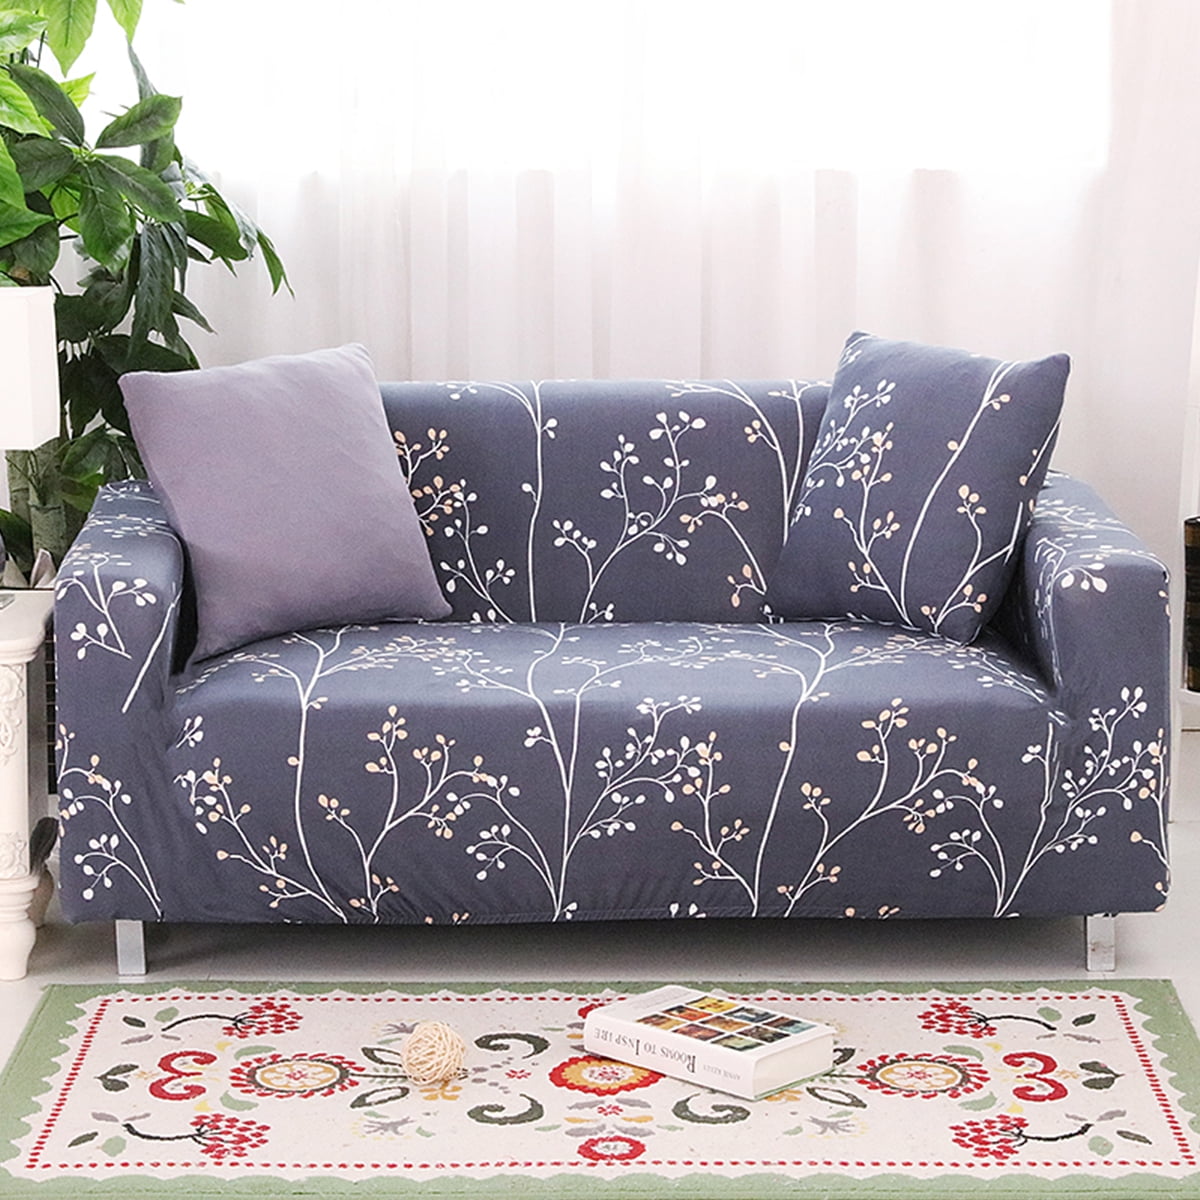 Details about   Waterproof Pet Protector 1 2 3 4-Seater Sofa Covers Stretch Floral Slipcover New 